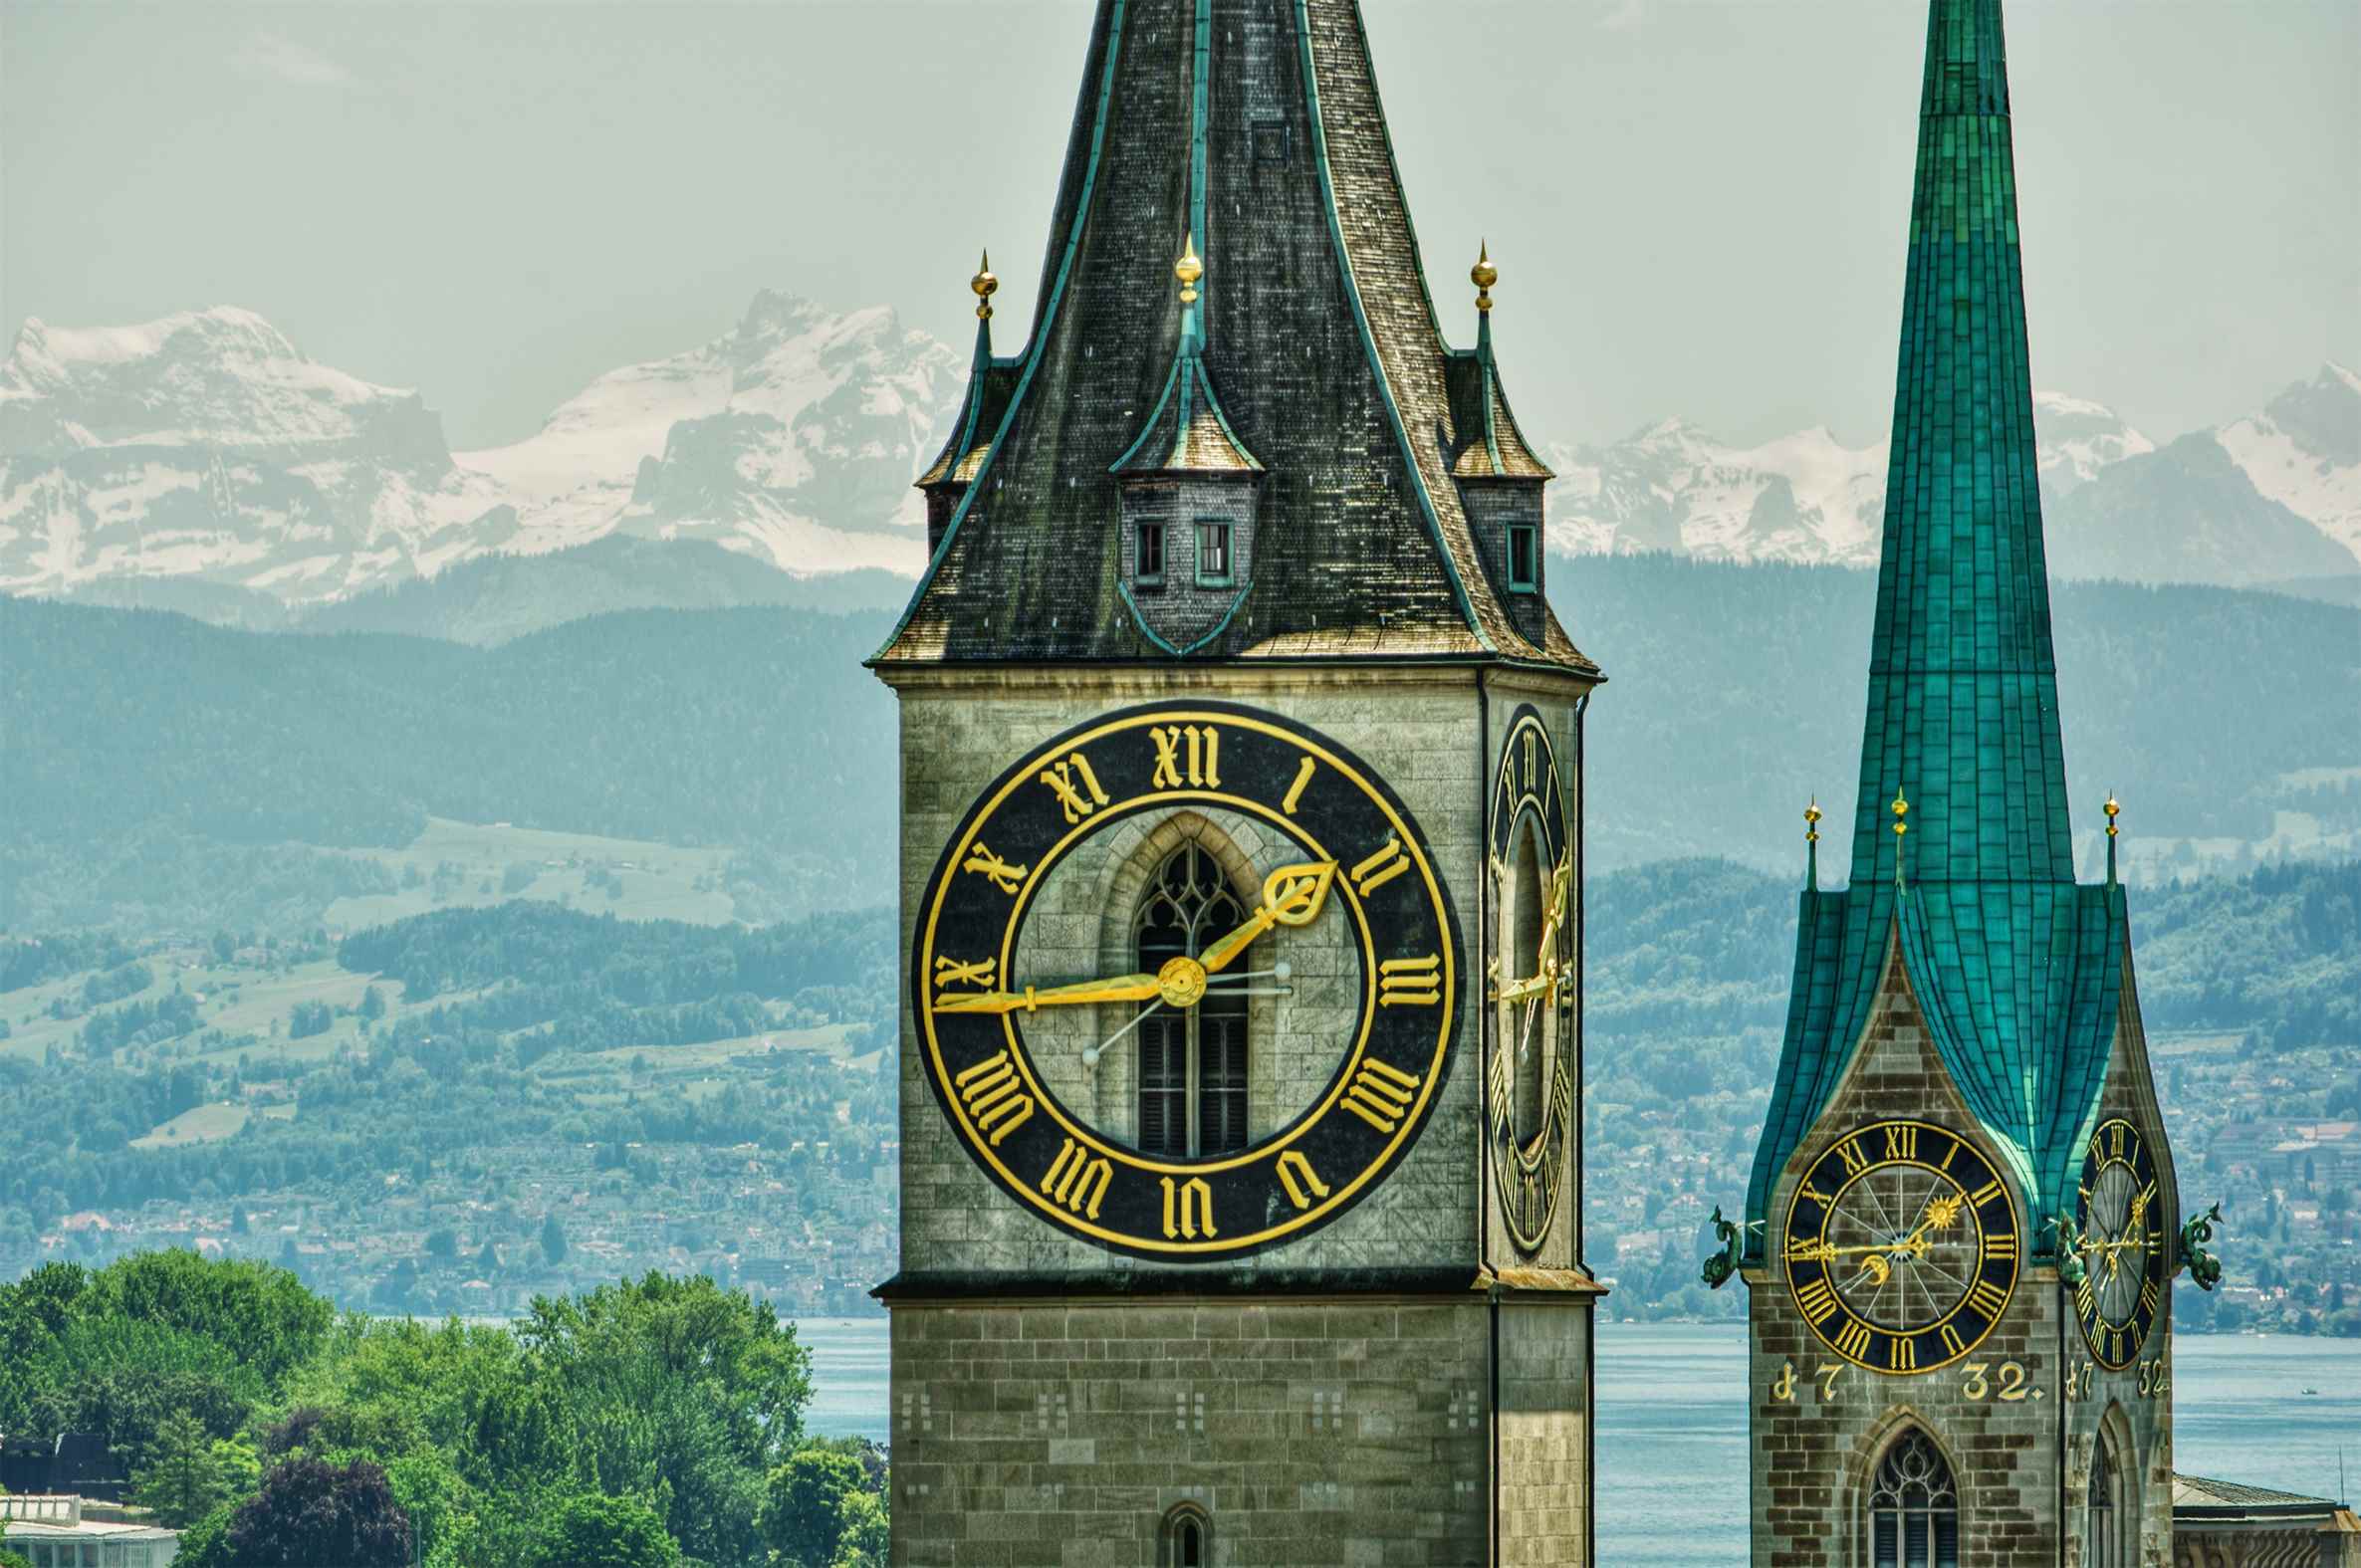 A visit to Beyer's Clock and Watch Museum in Zurich